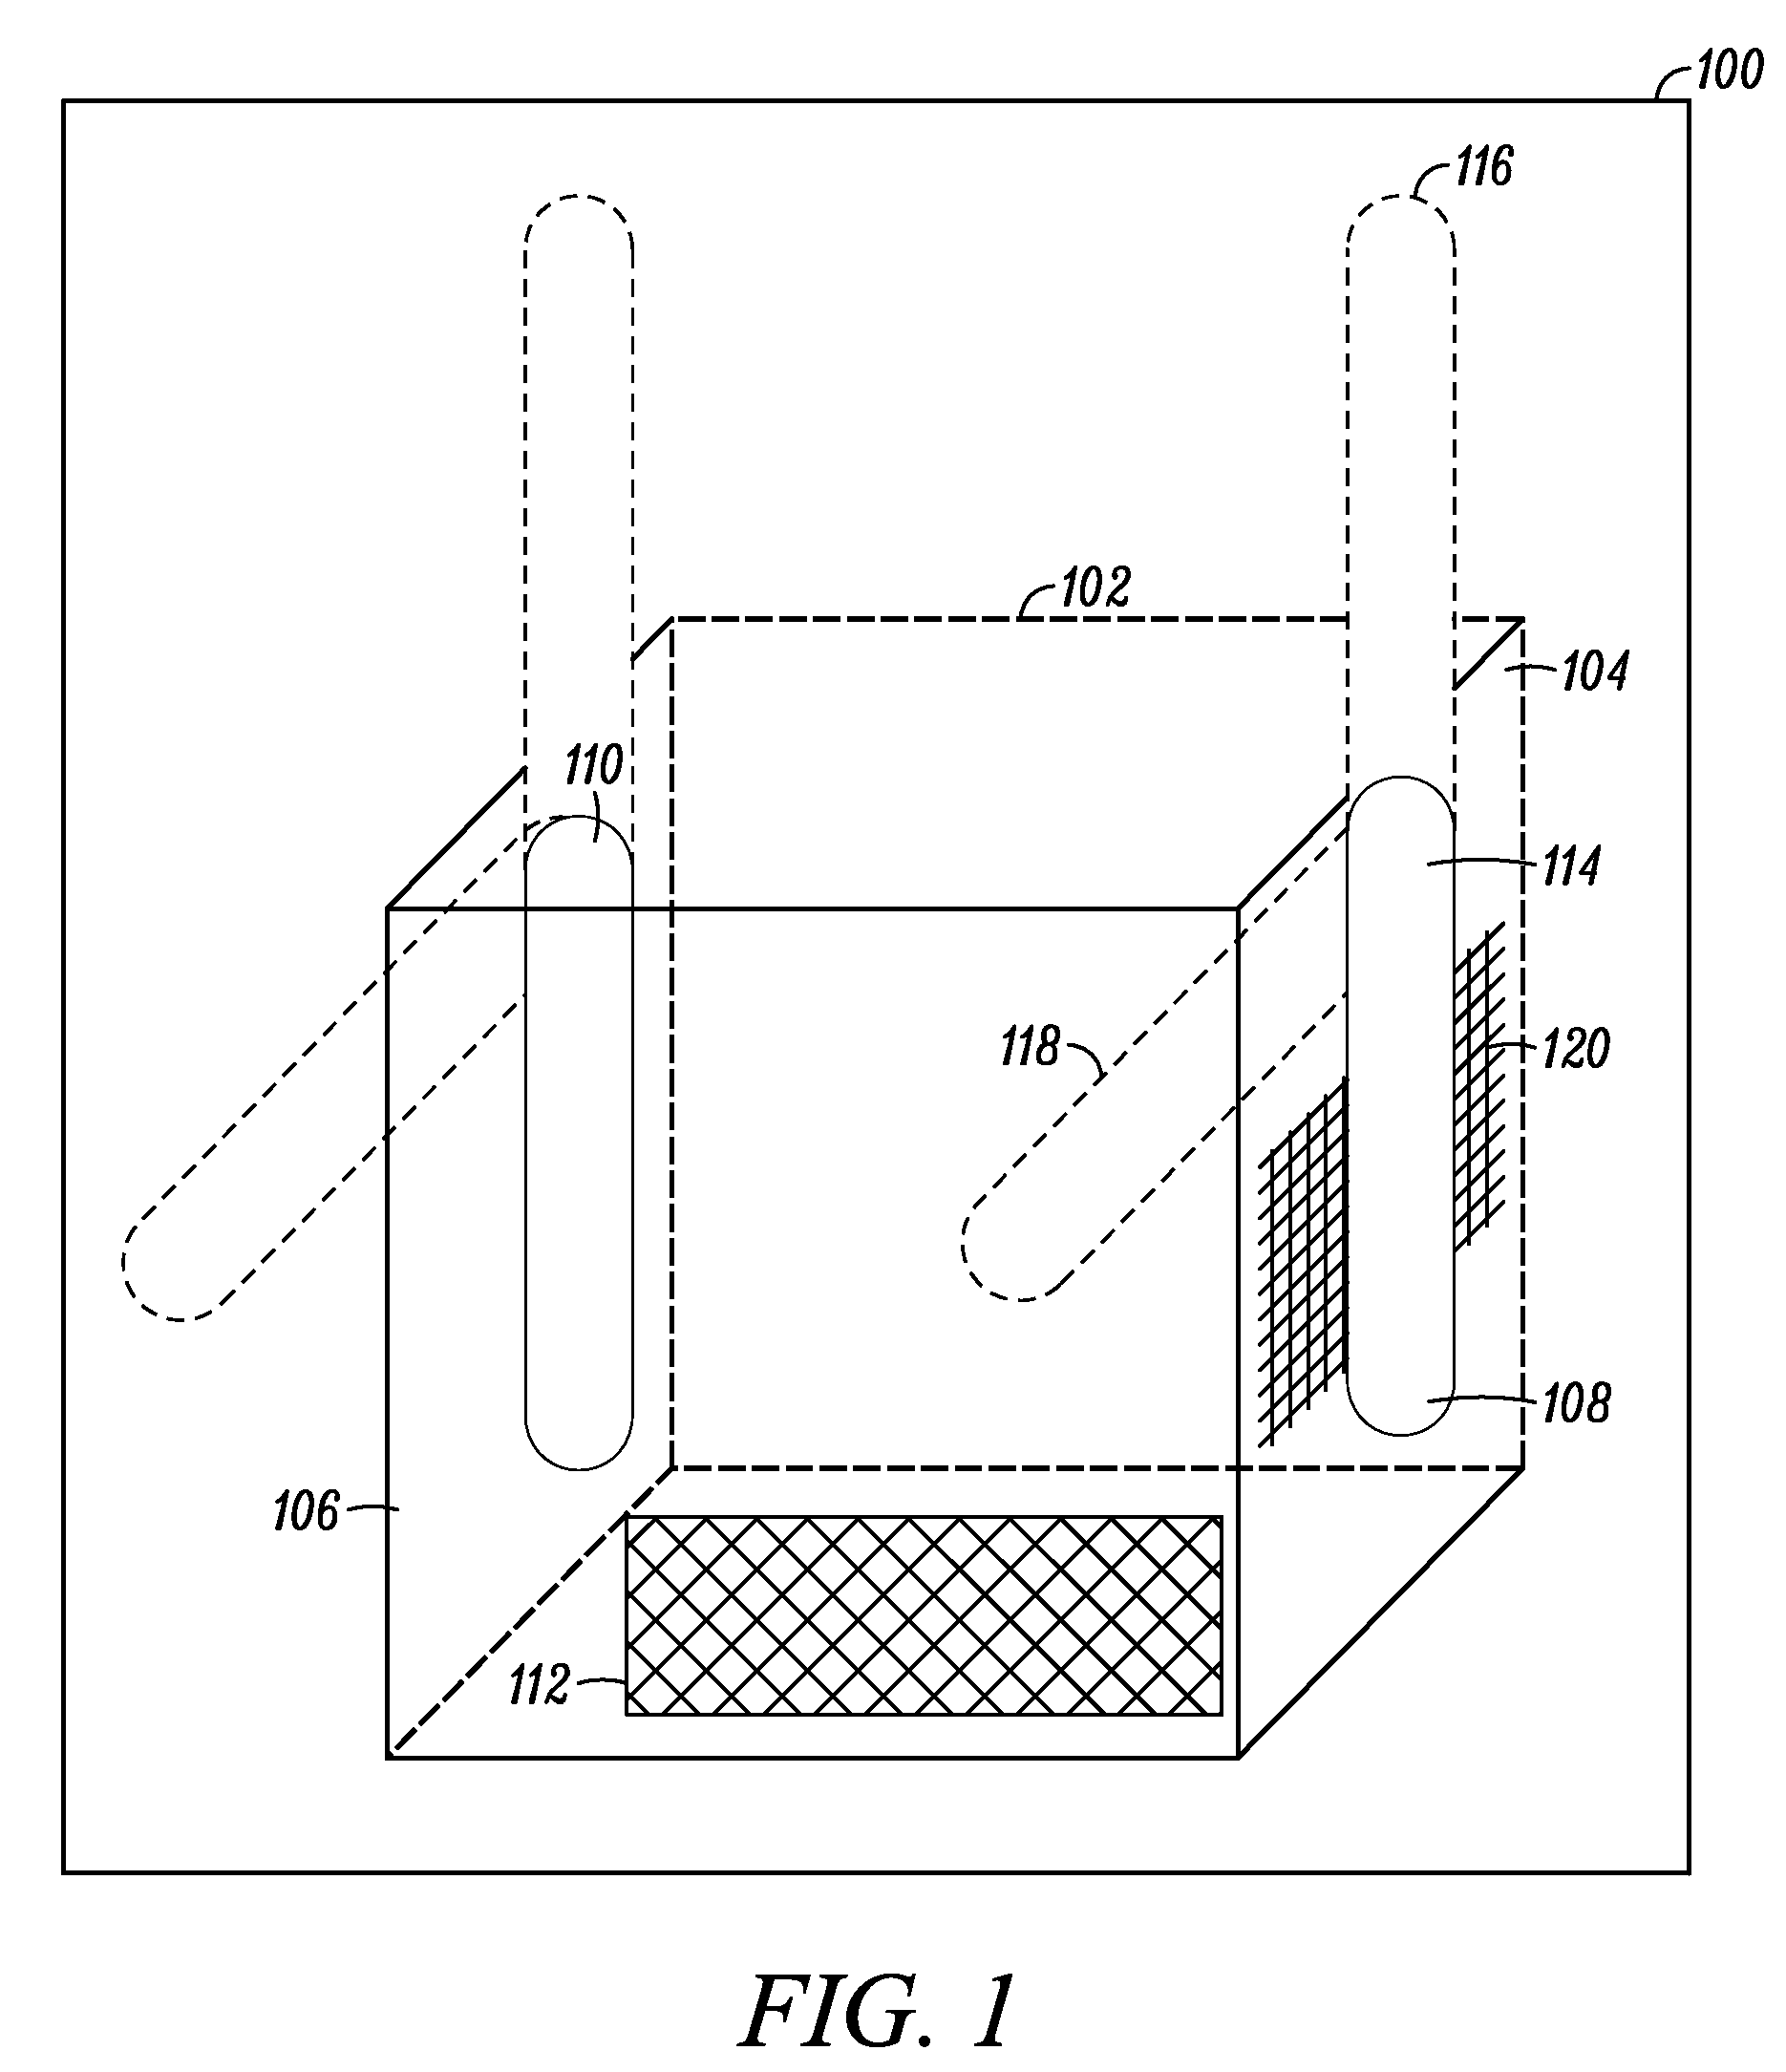 Antenna system and method for controlling an antenna pattern of a communication device